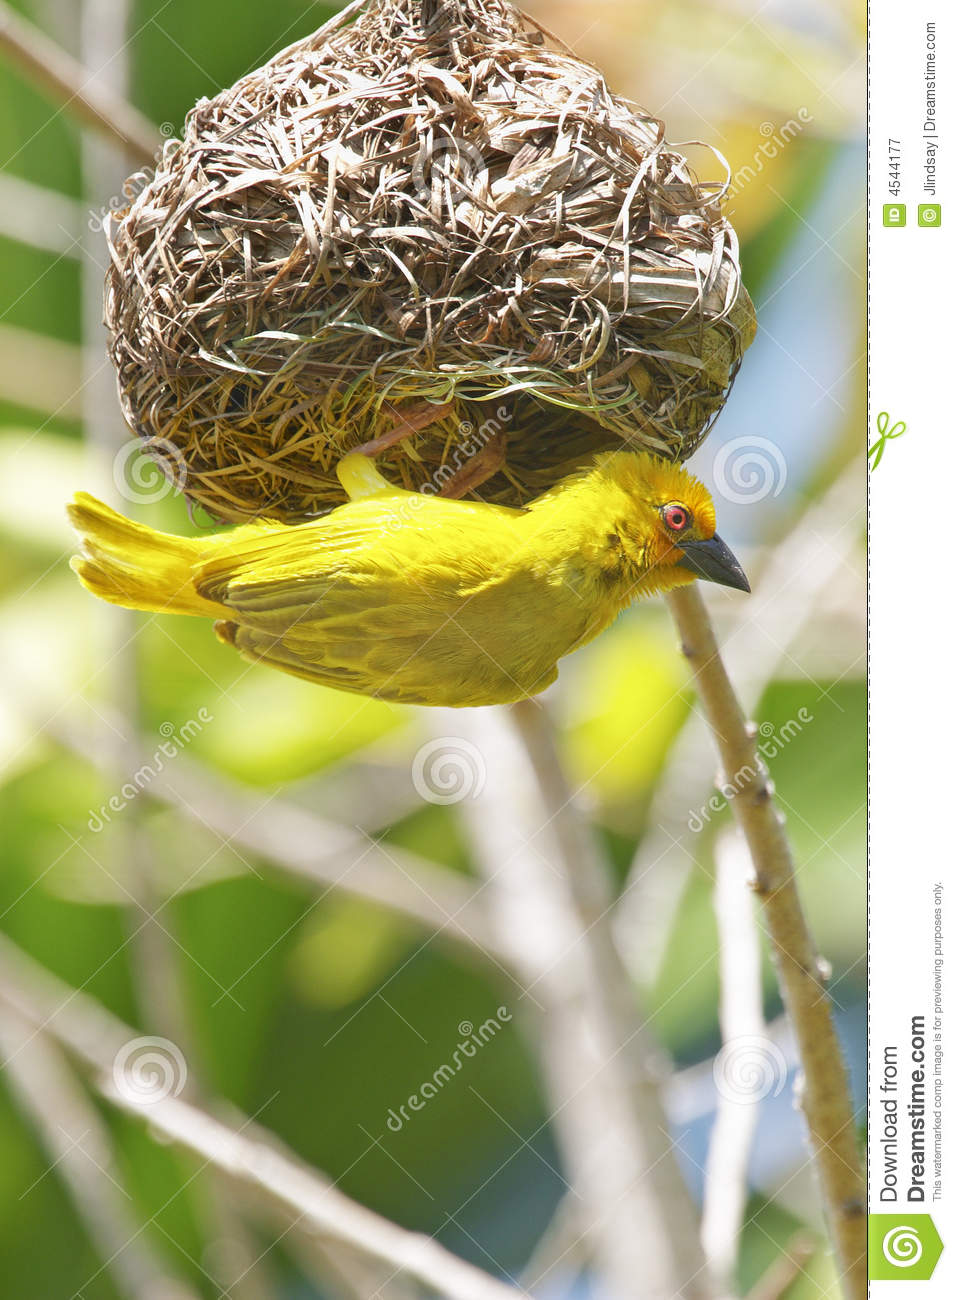 Yellow Weaver Bird Building A Nest Royalty Free Stock Photography    